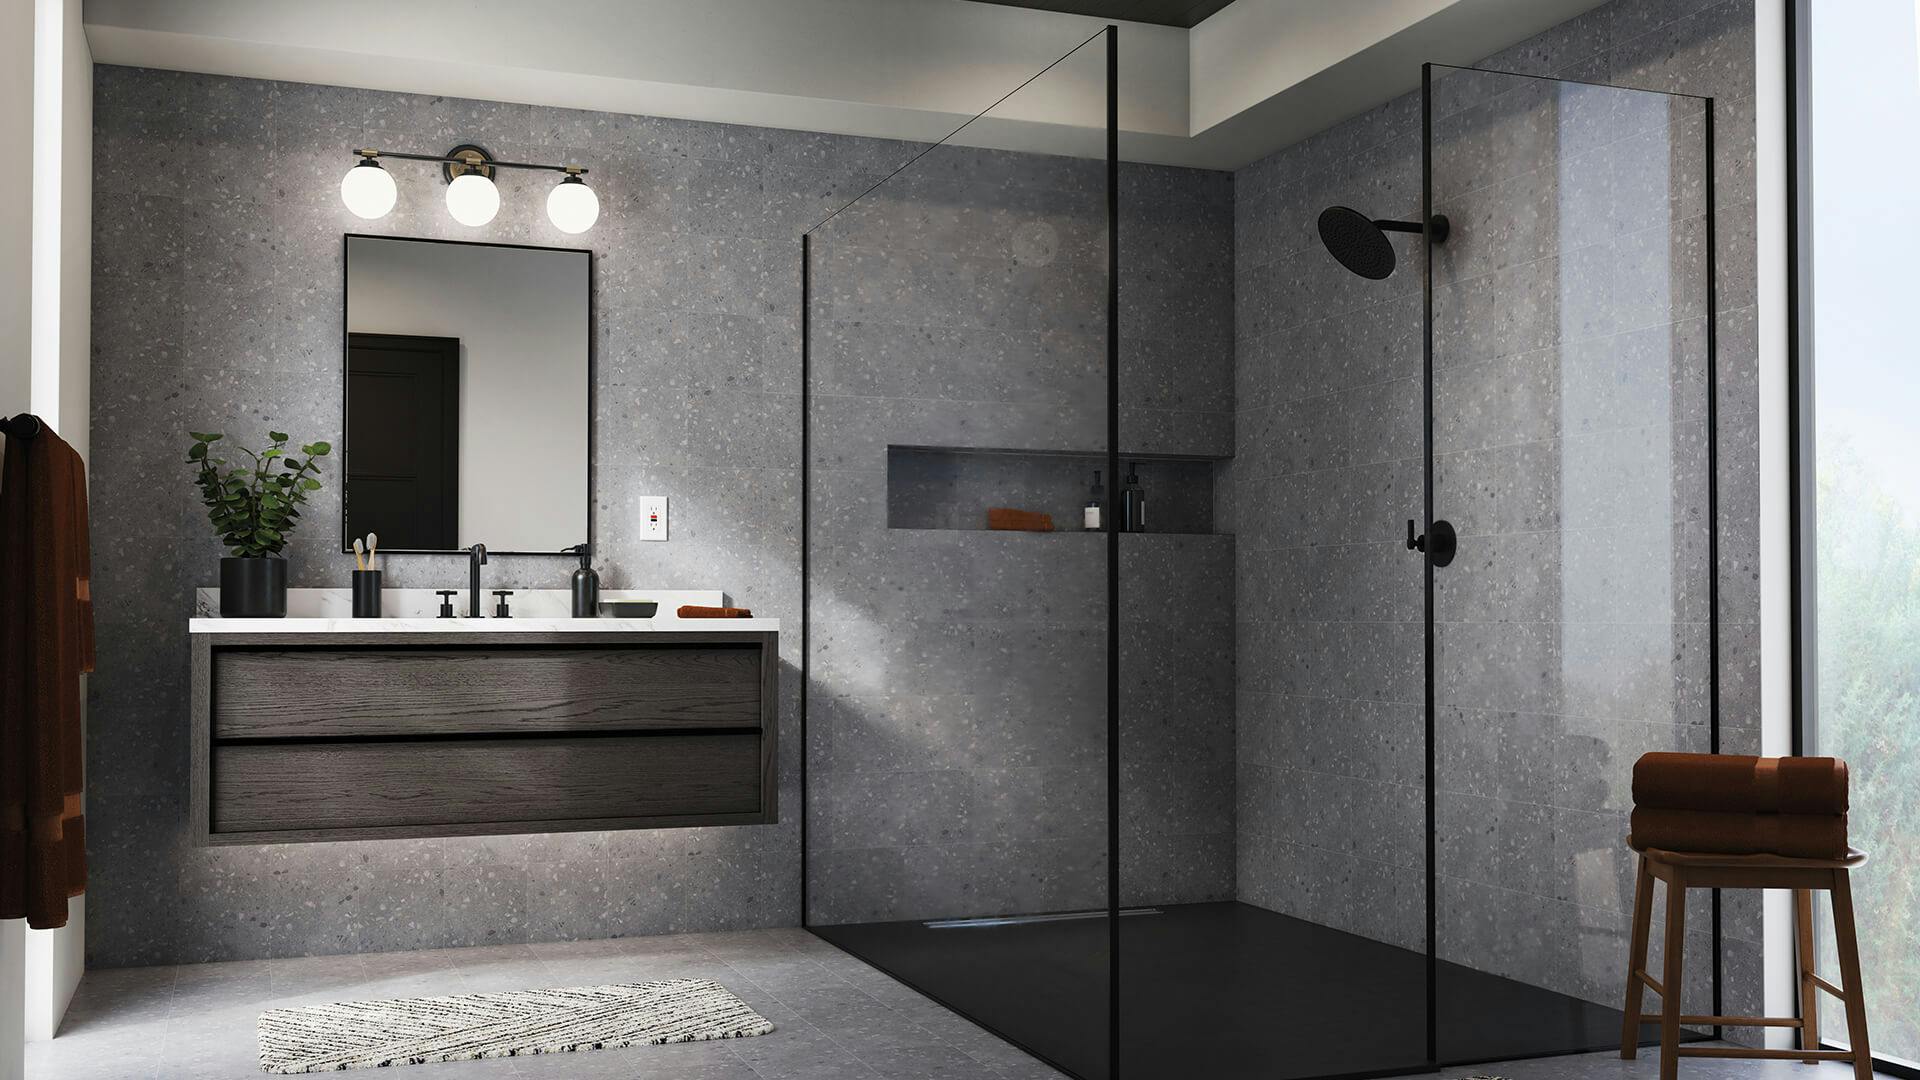 Gray tiled bathroom with glass show and Benno 3-light vanity light above floating wood vanity